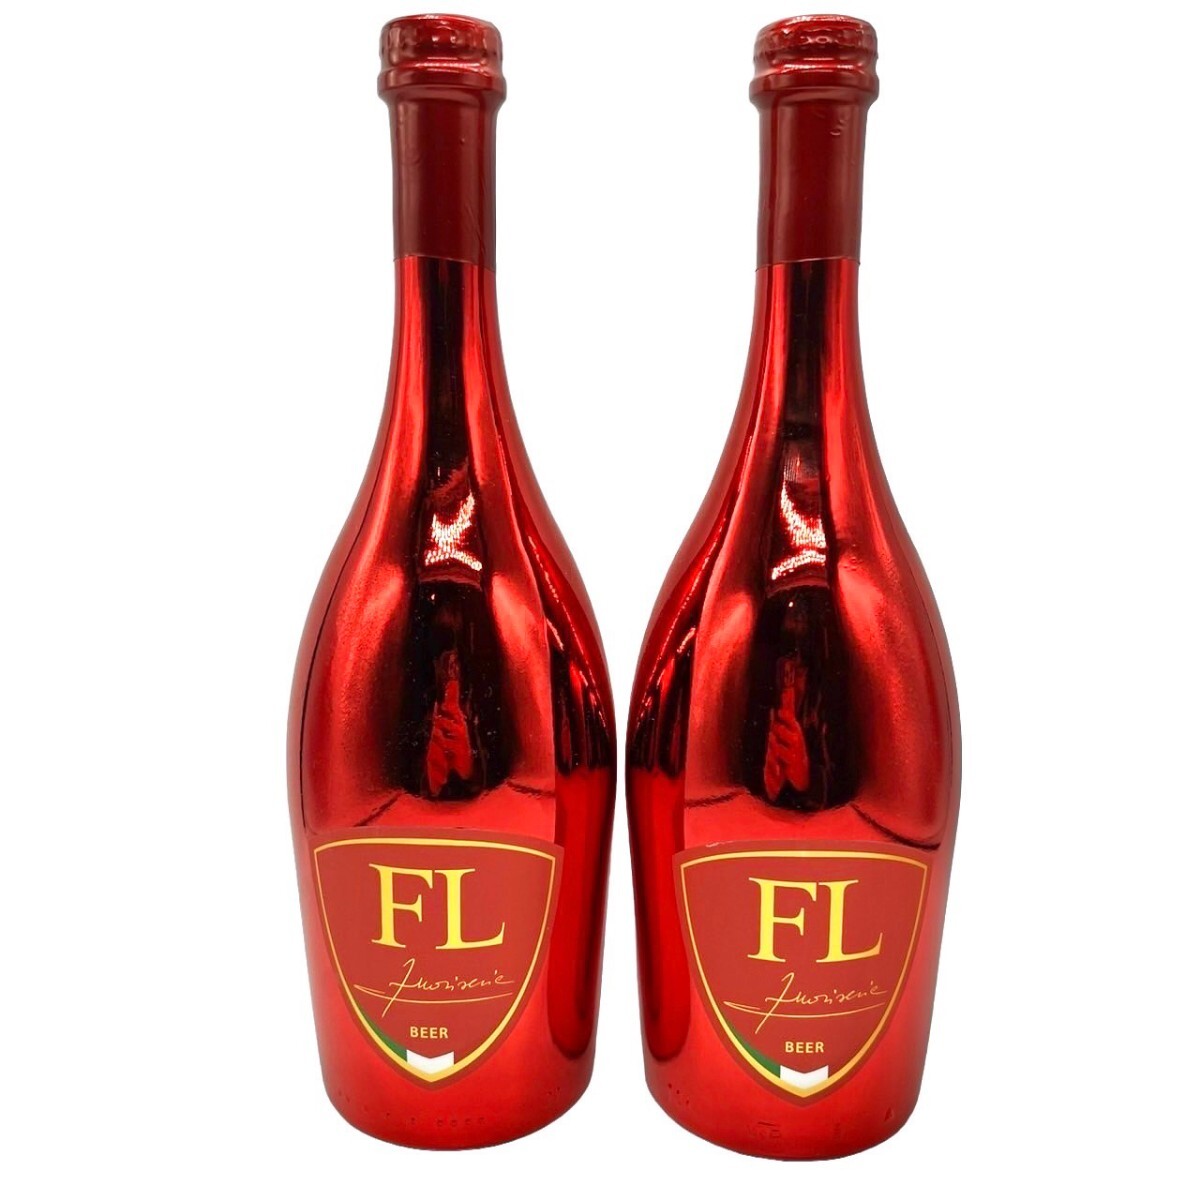  fabio Lamborghini beer 2 ps wheat . ho p750ml 6% red line beer FL 3-25-87.88 including in a package un- possible N